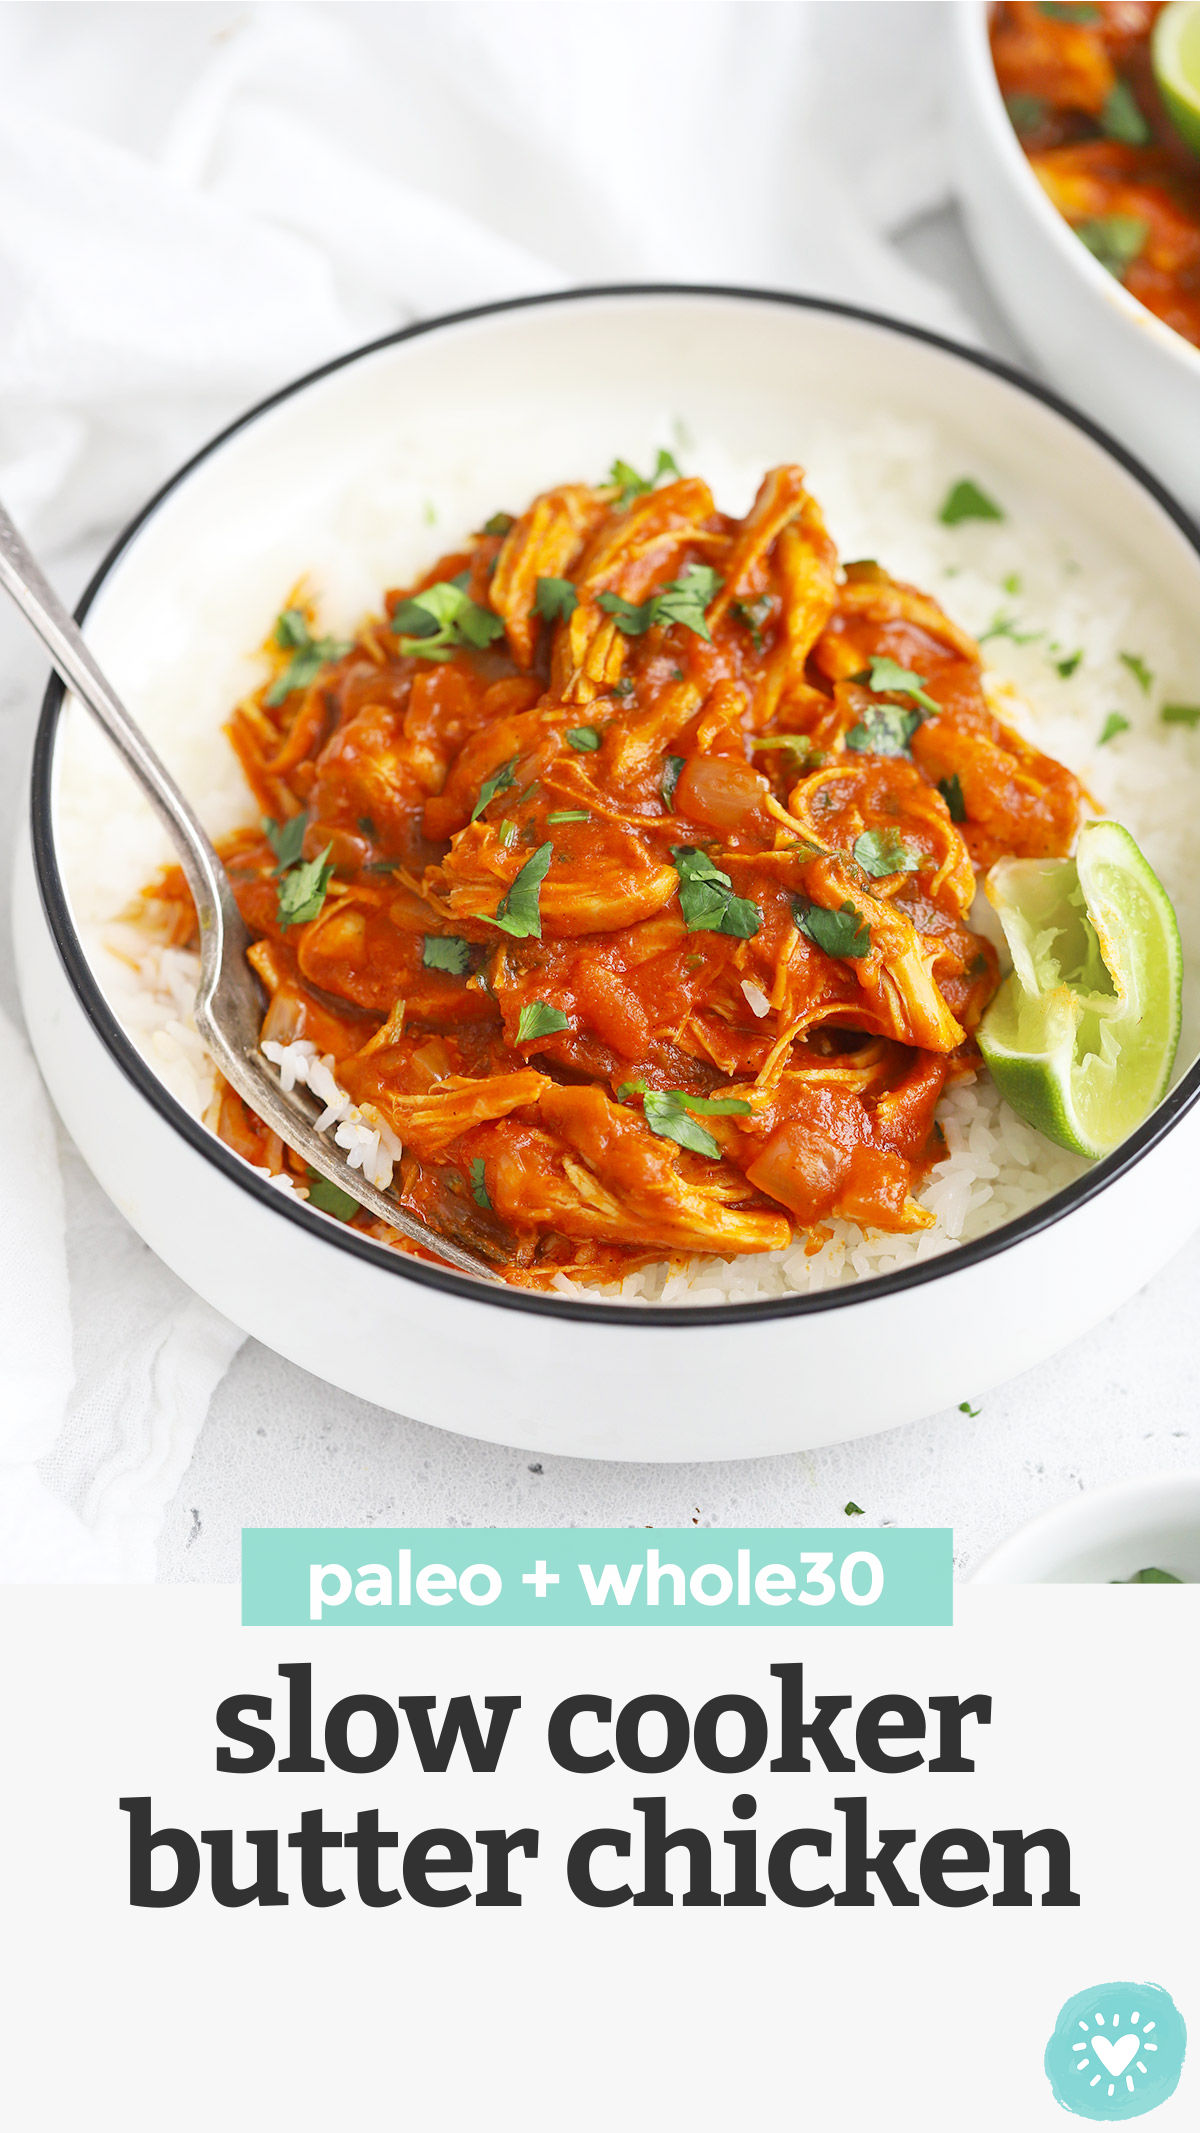 Slow Cooker Butter Chicken - This paleo butter chicken recipe is a perfect HEALTHY slow cooker dinner! It's so easy and delicious, you'll want to slurp the sauce with a spoon! (Gluten-Free, Dairy-Free, Paleo, Whole30) // Whole30 butter chicken // crock pot butter chicken // dairy free butter chicken // Paleo Slow Cooker Recipe #slowcooker #crockpot #butterchicken #chicken